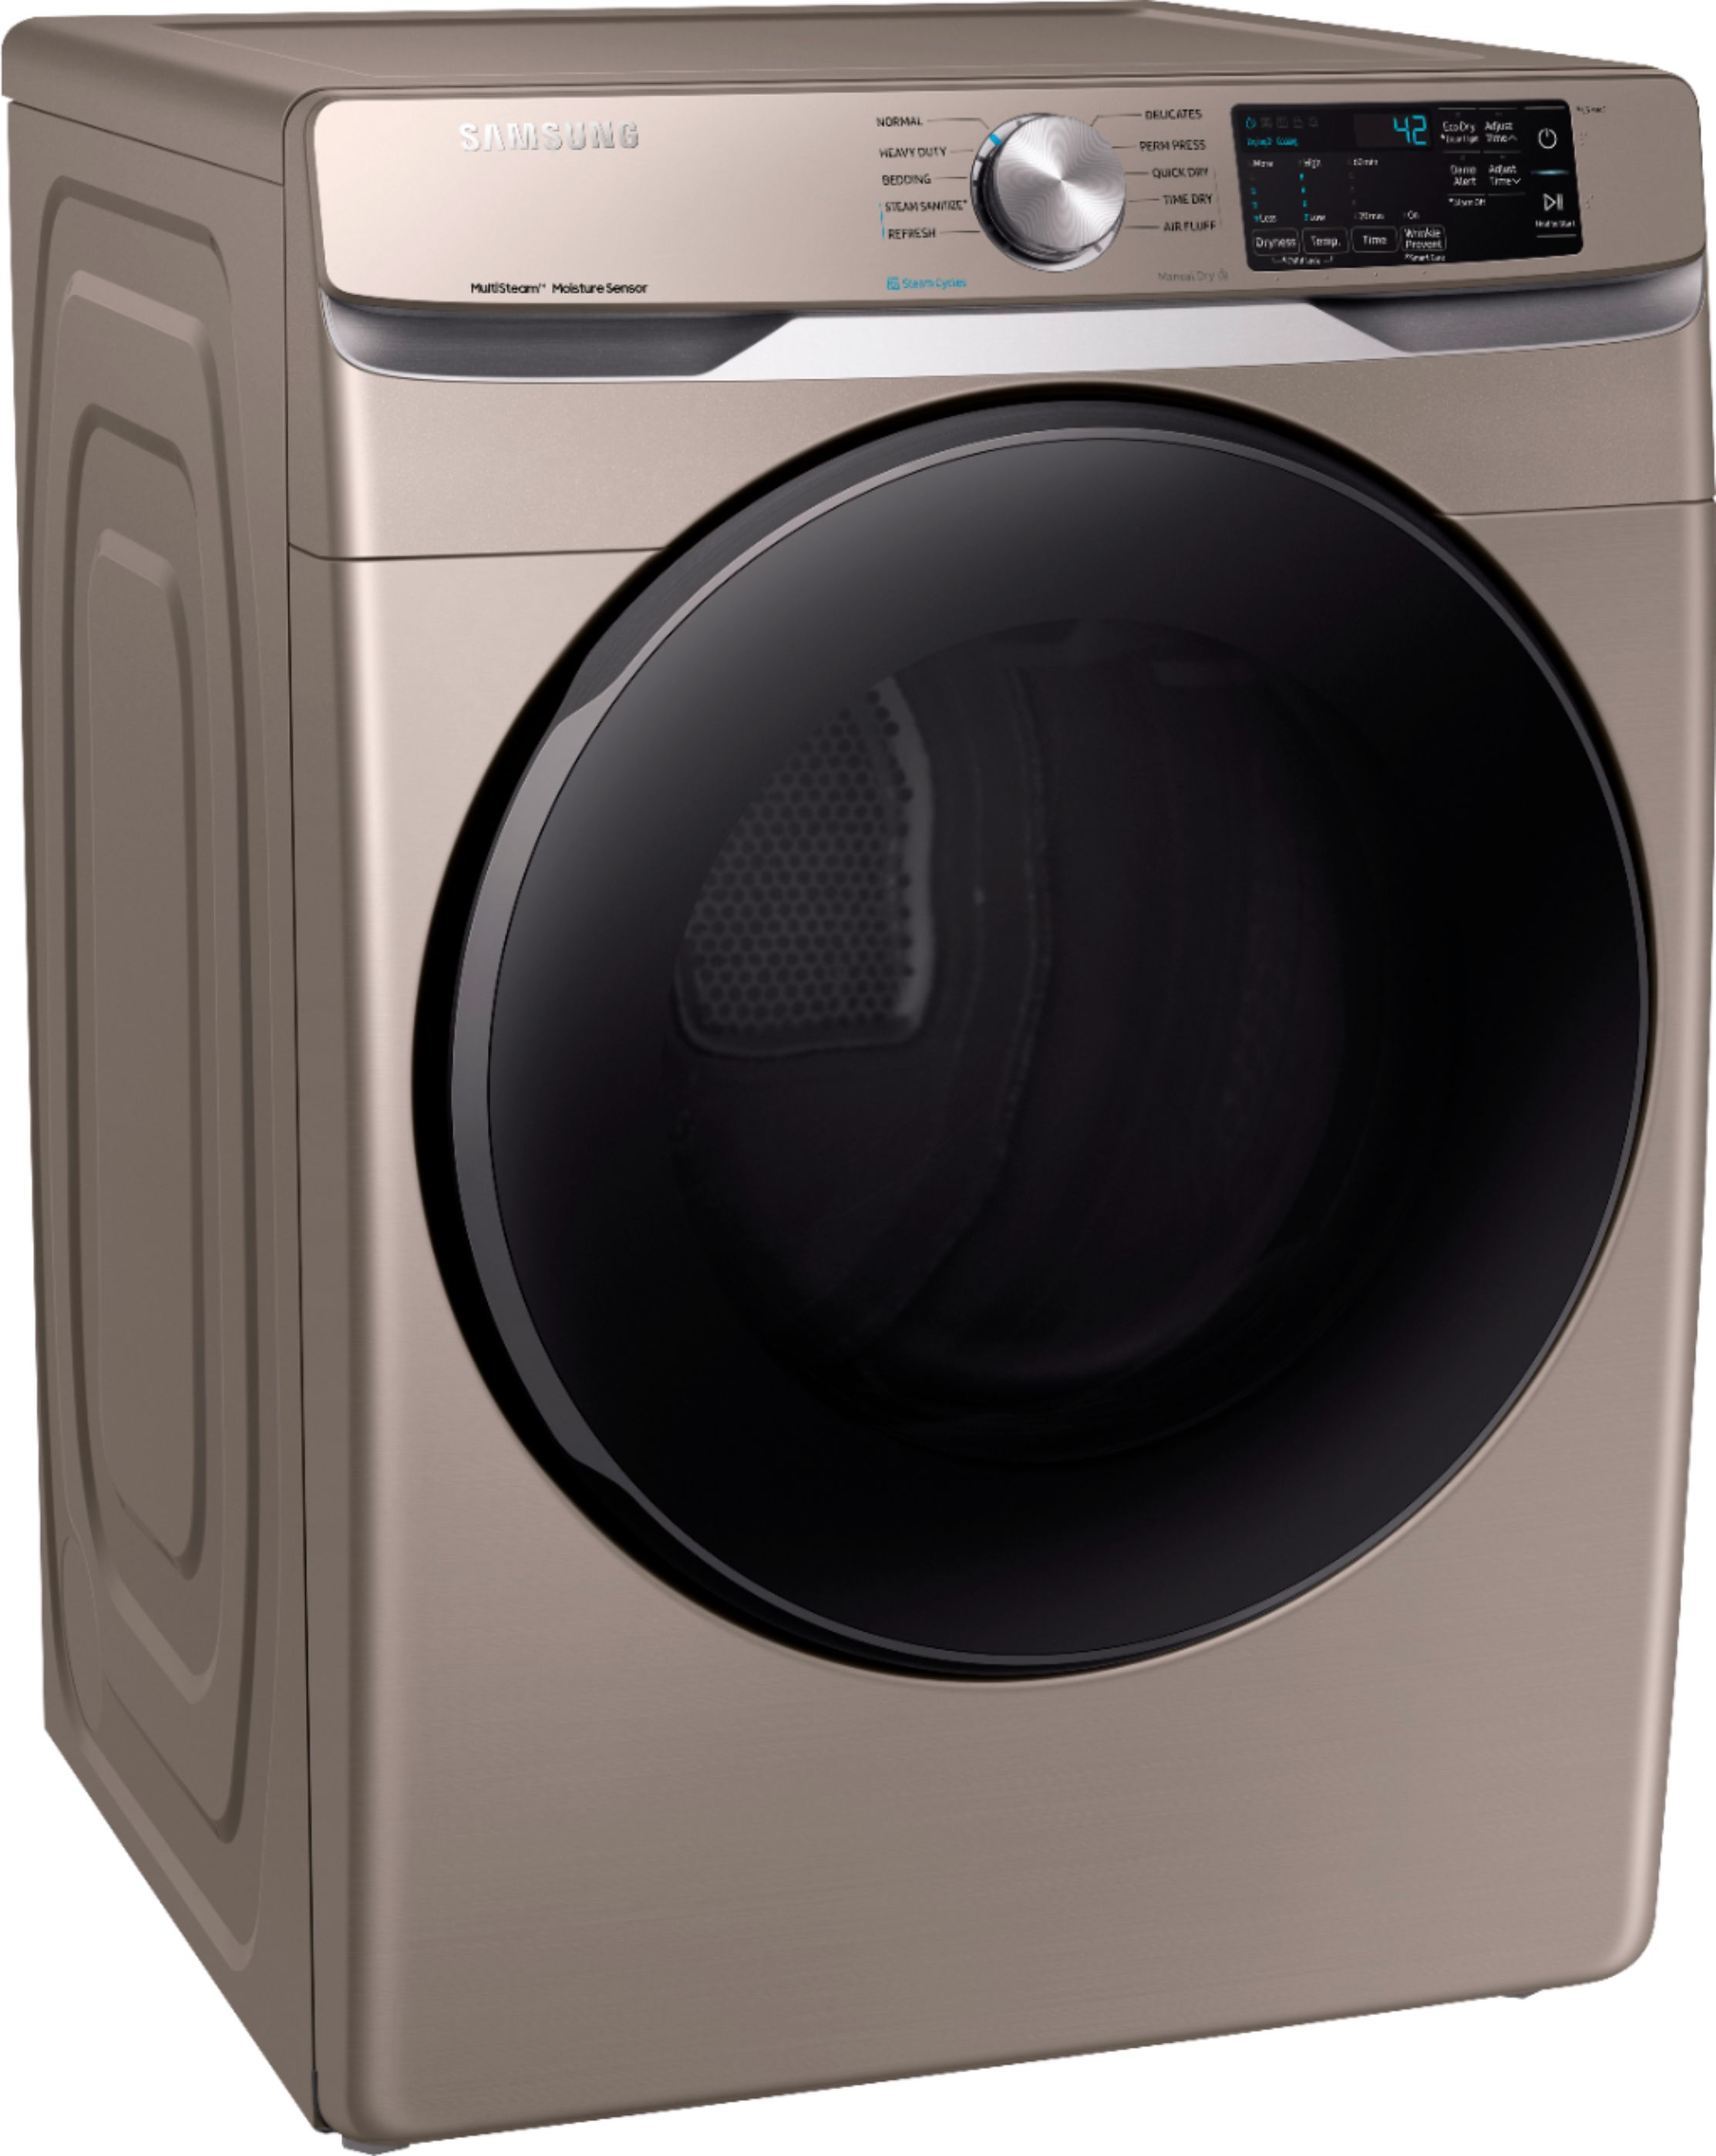 Samsung 7.5 Cu. Ft. Stackable Smart Gas Dryer with Steam Sanitize+  Champagne DVG45B6300C - Best Buy